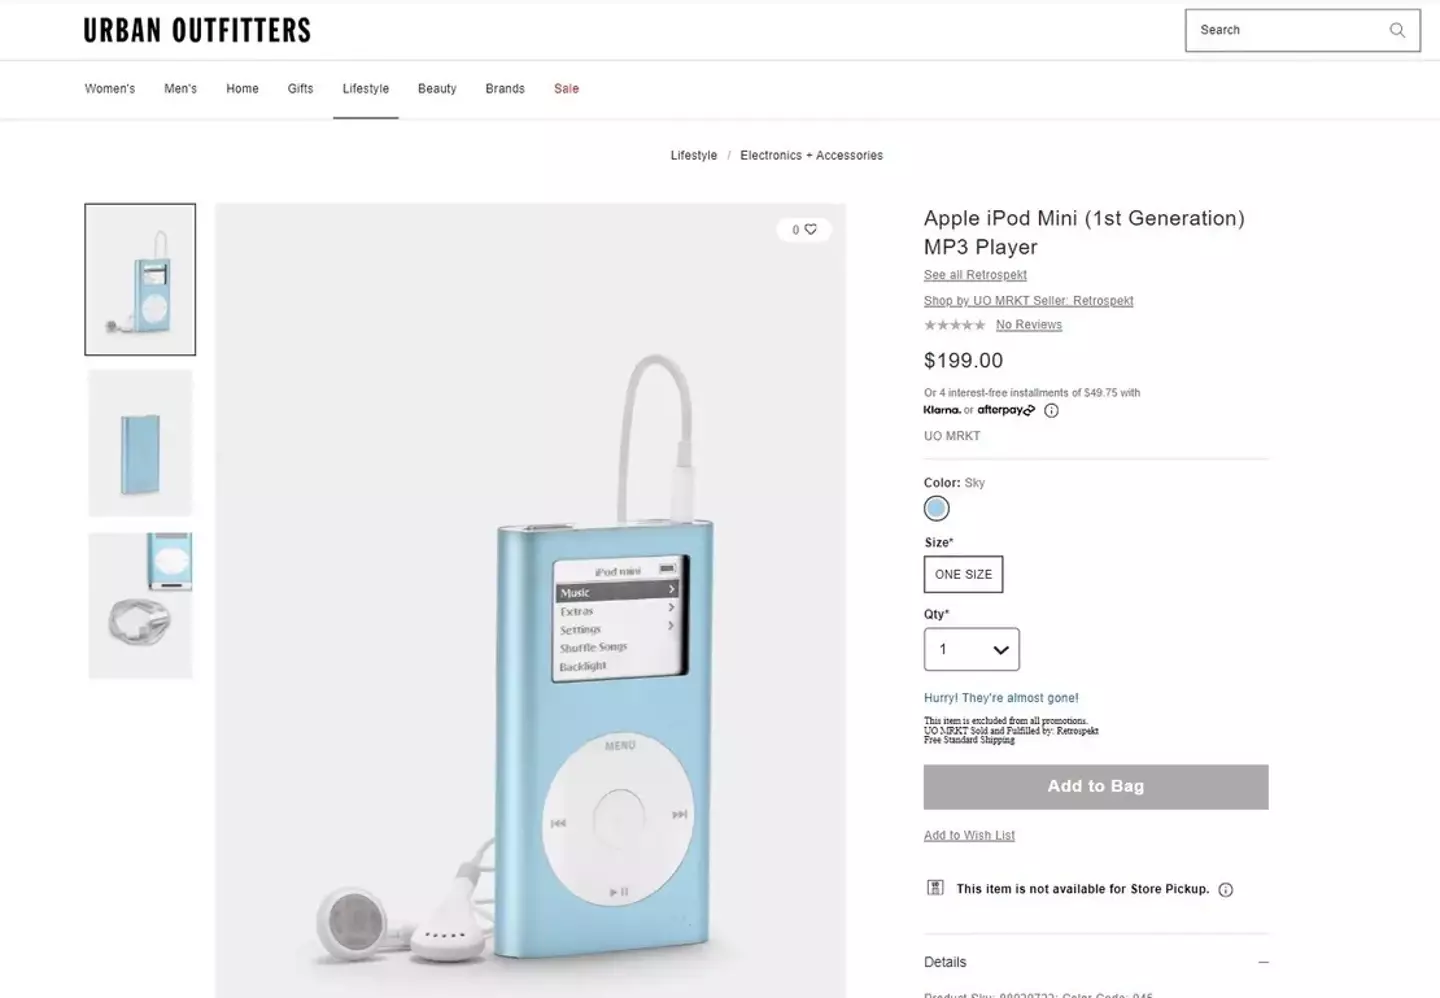 Urban Outfitters had pages listed selling older version iPods.